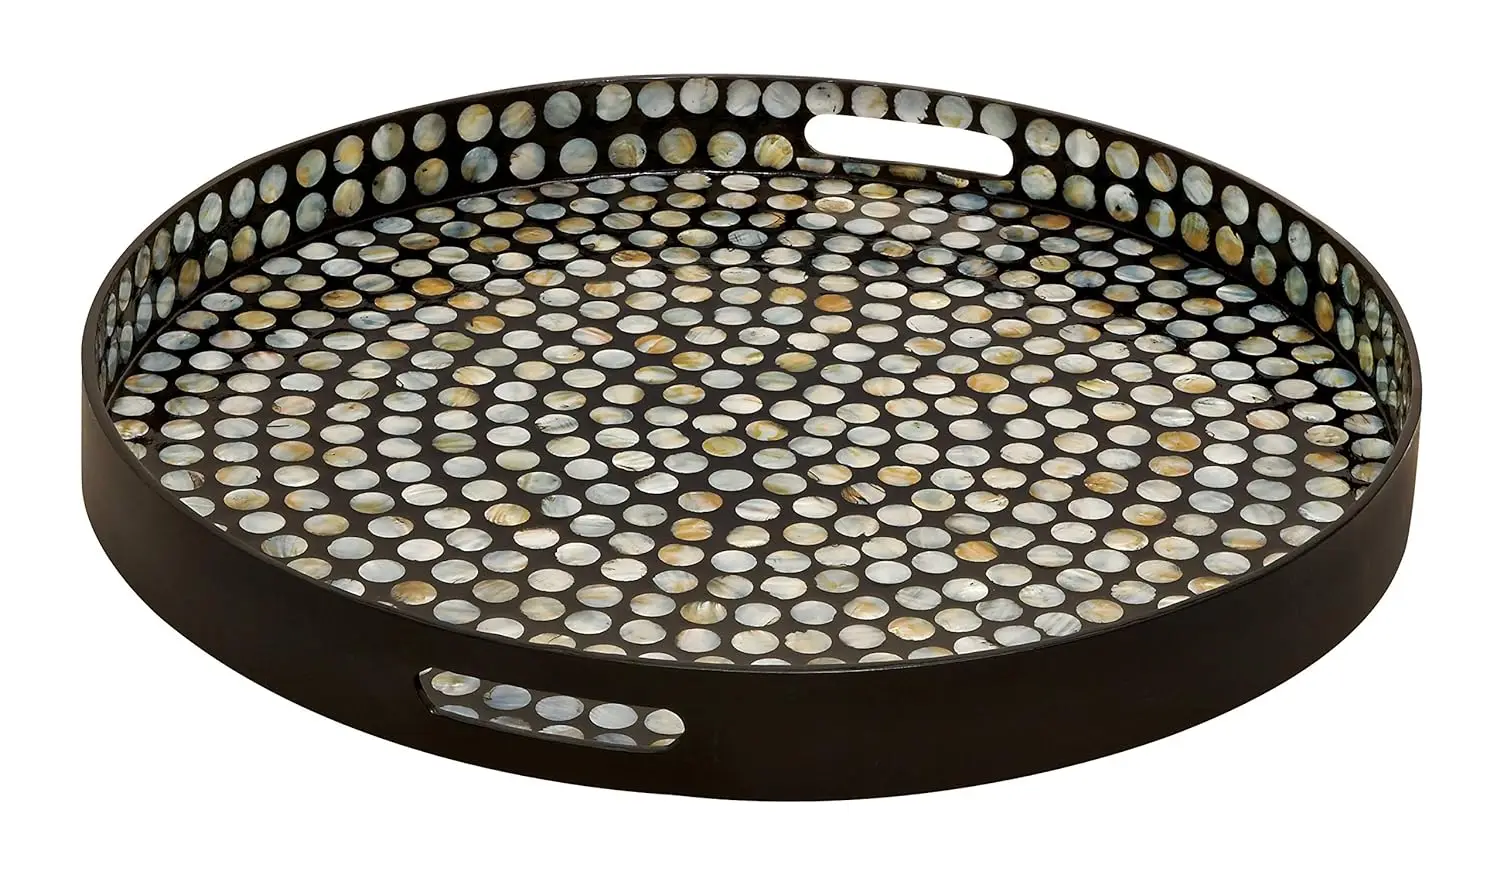 

of Pearl Round Tray with Slot Handles, 24" x 24" x 3", Black